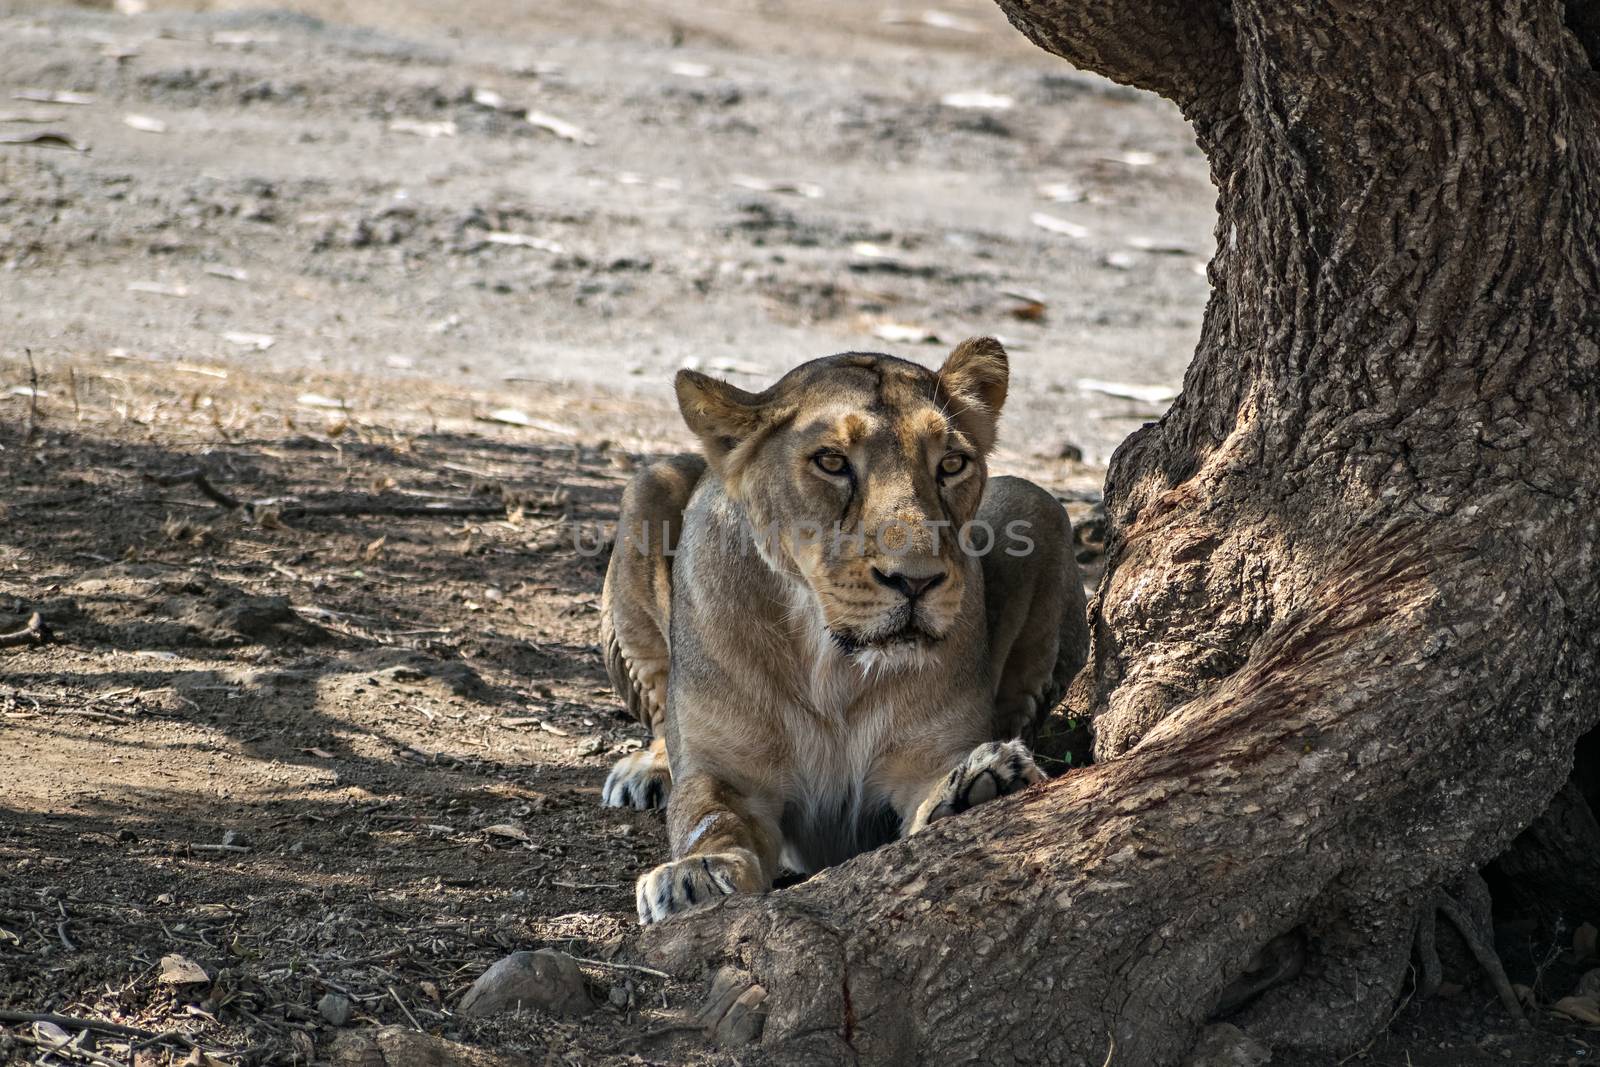 A lioness resting in the shadow of a huge tree in Gir with a giant tree trunk , Gujrat, India.